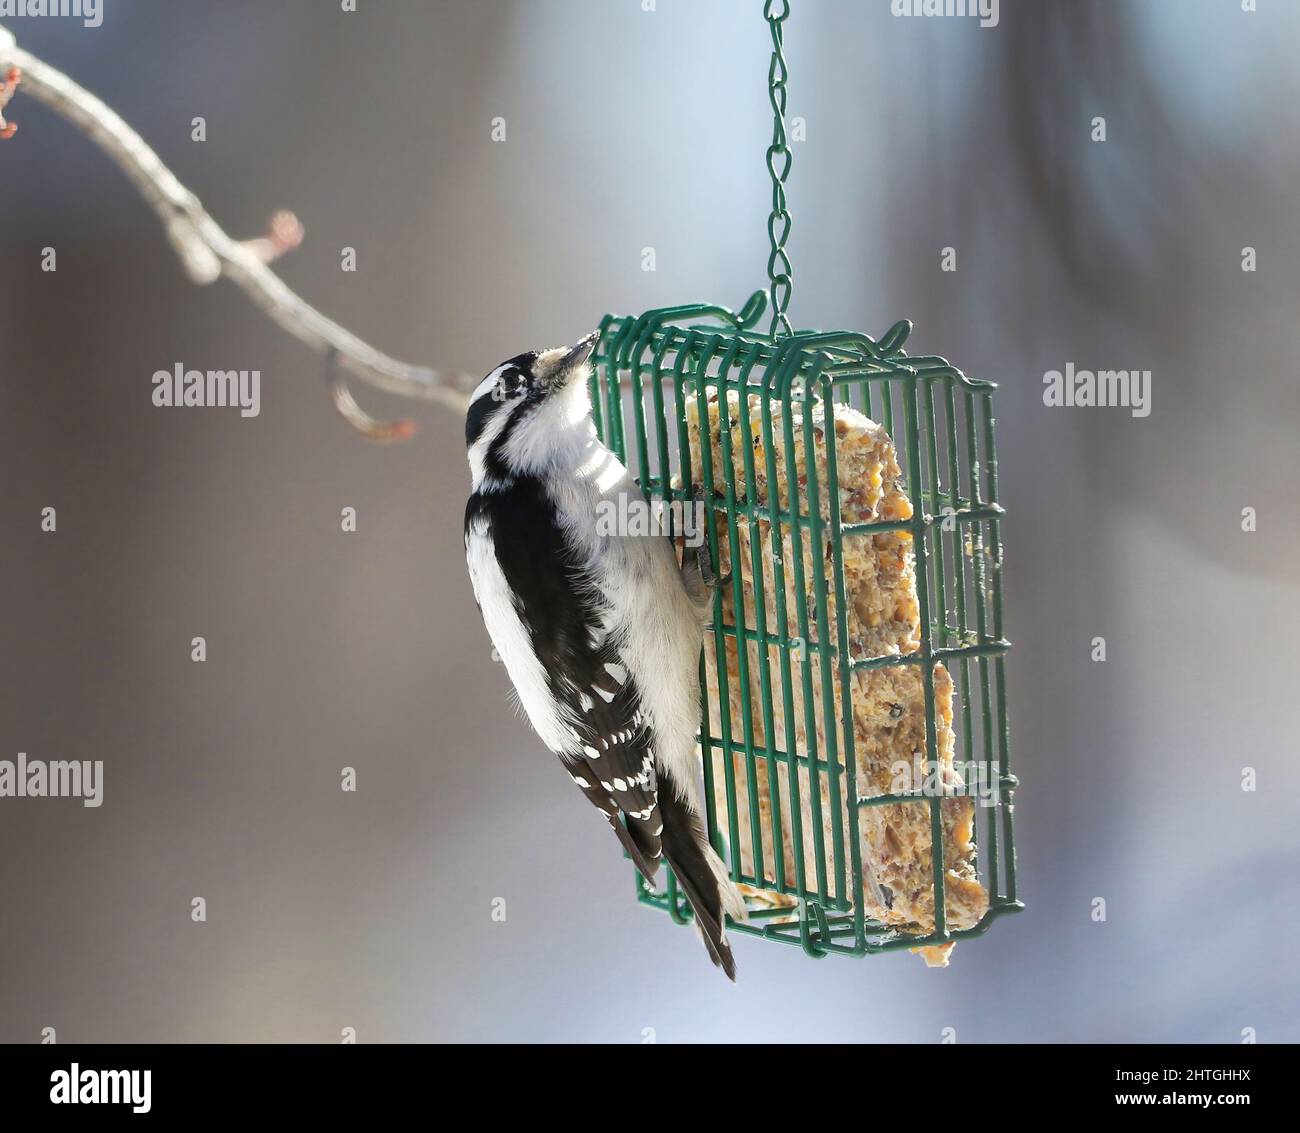 A pretty Downy Woodpecker looks up while clinging to a suet feeder on a bright Winter Day. Stock Photo